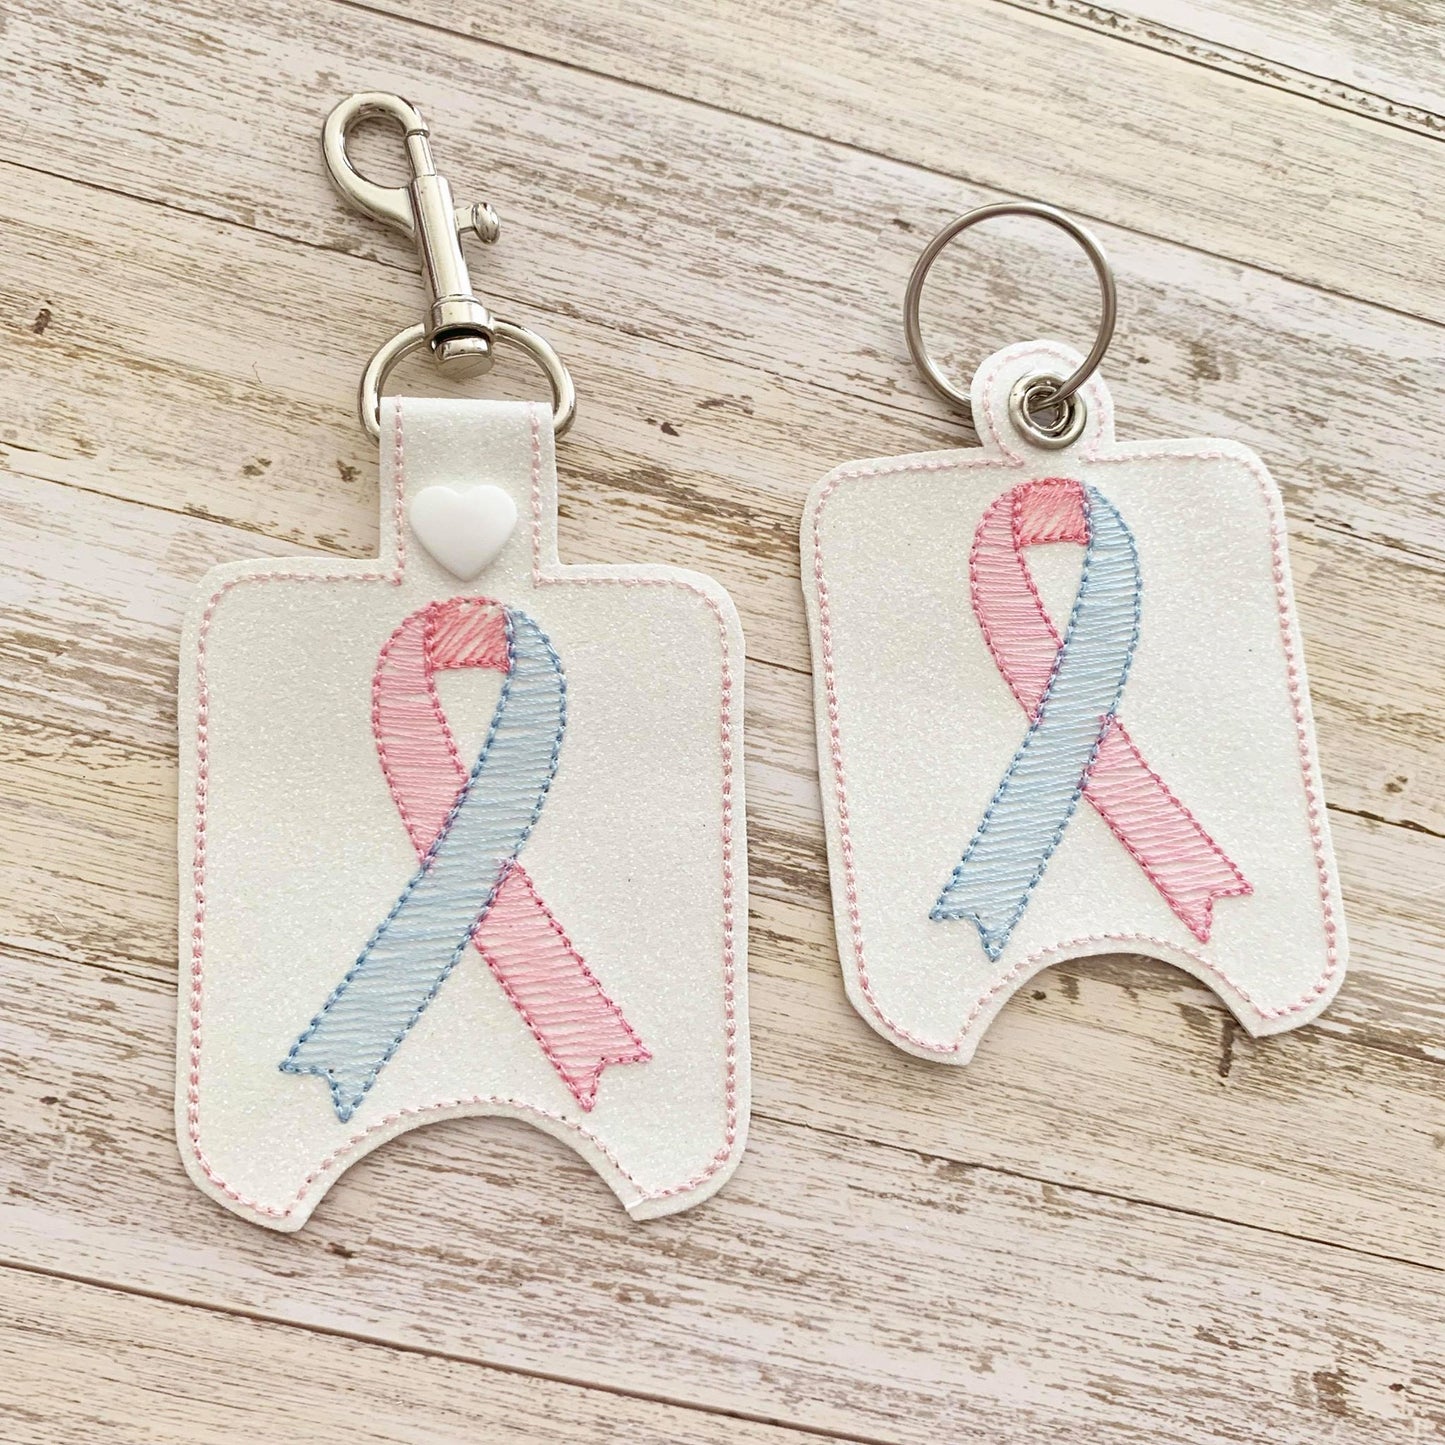 Dual Color Awareness Ribbon Sanitizer Holders - Embroidery Design - DIGITAL Embroidery DESIGN